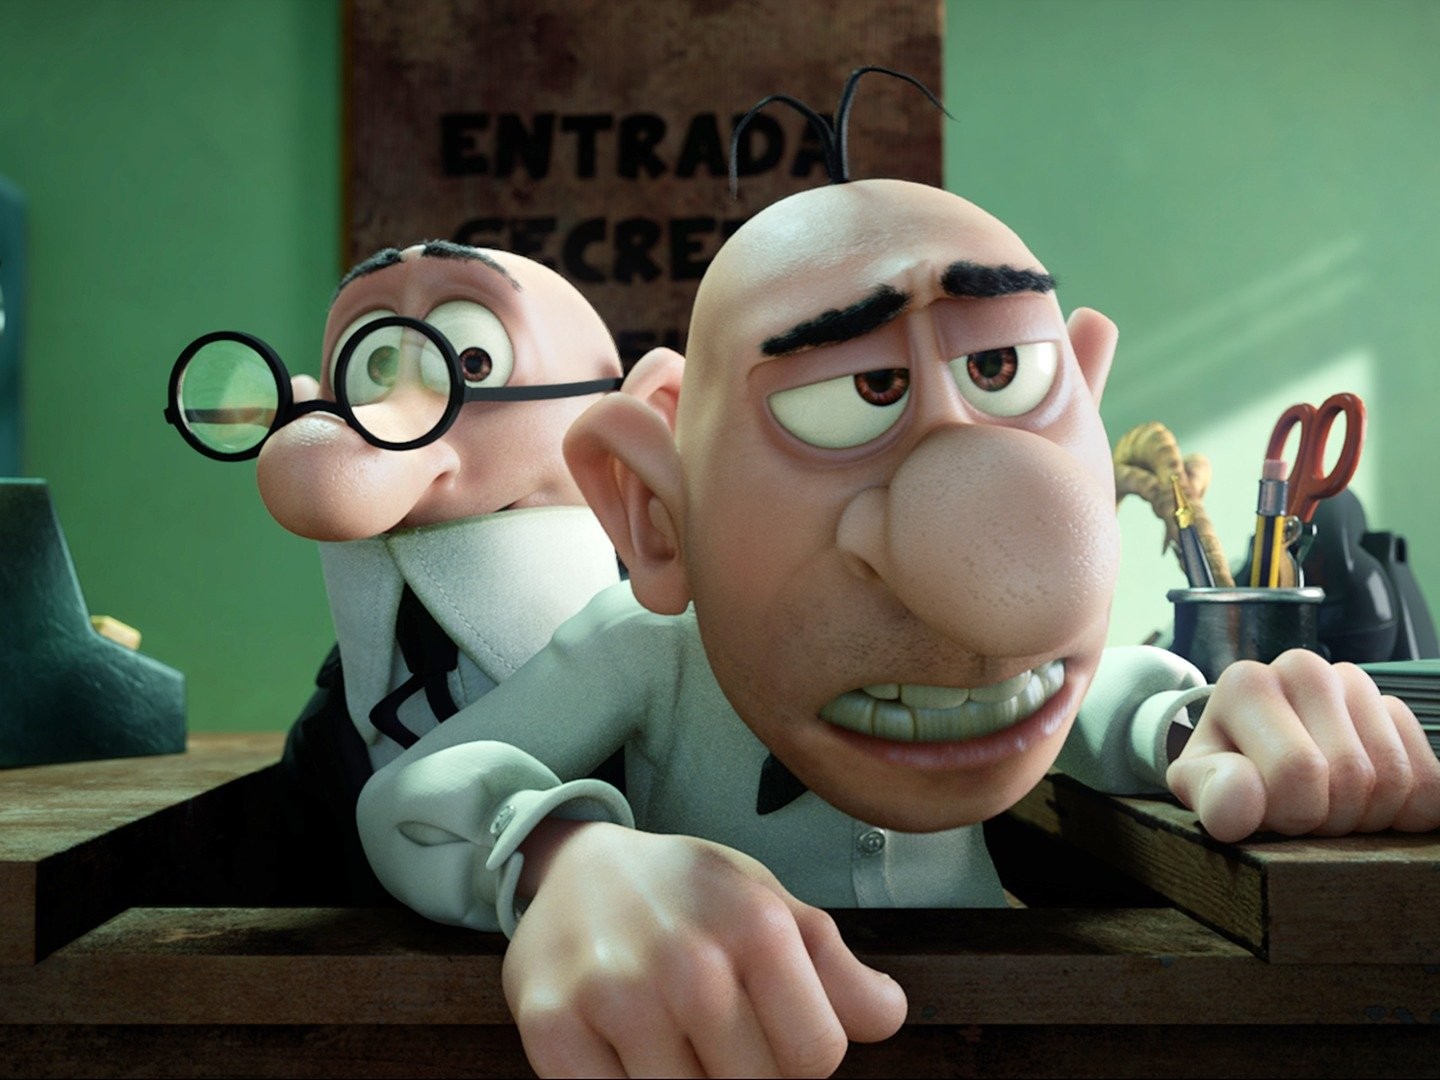 105 Mortadelo & Filemon Photos & High Res Pictures - Getty Images